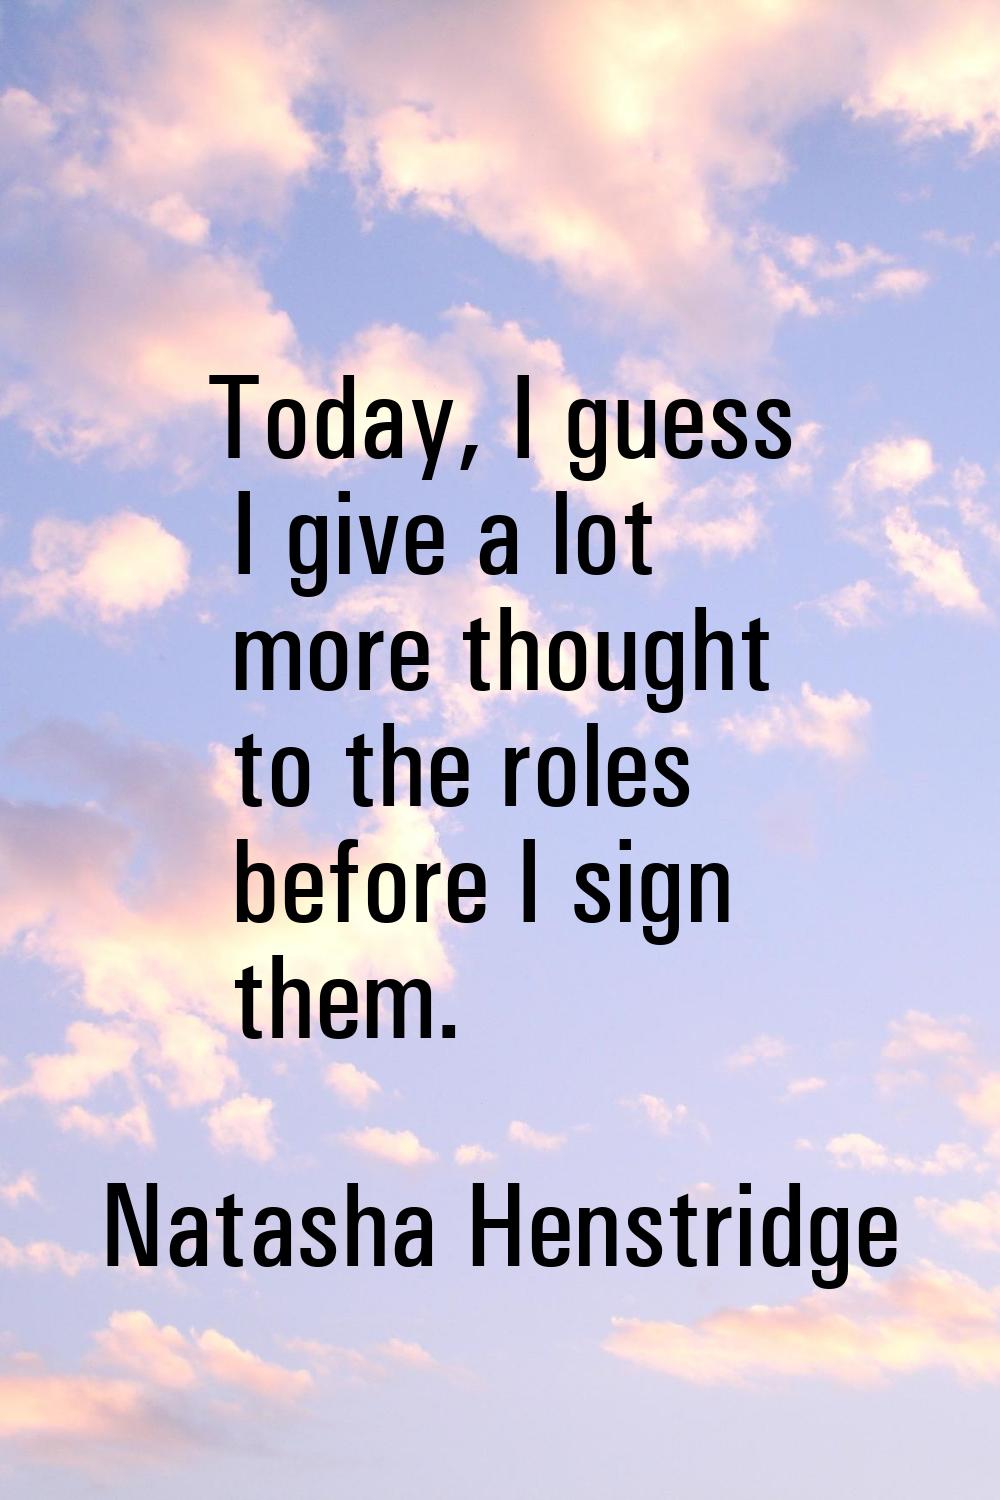 Today, I guess I give a lot more thought to the roles before I sign them.